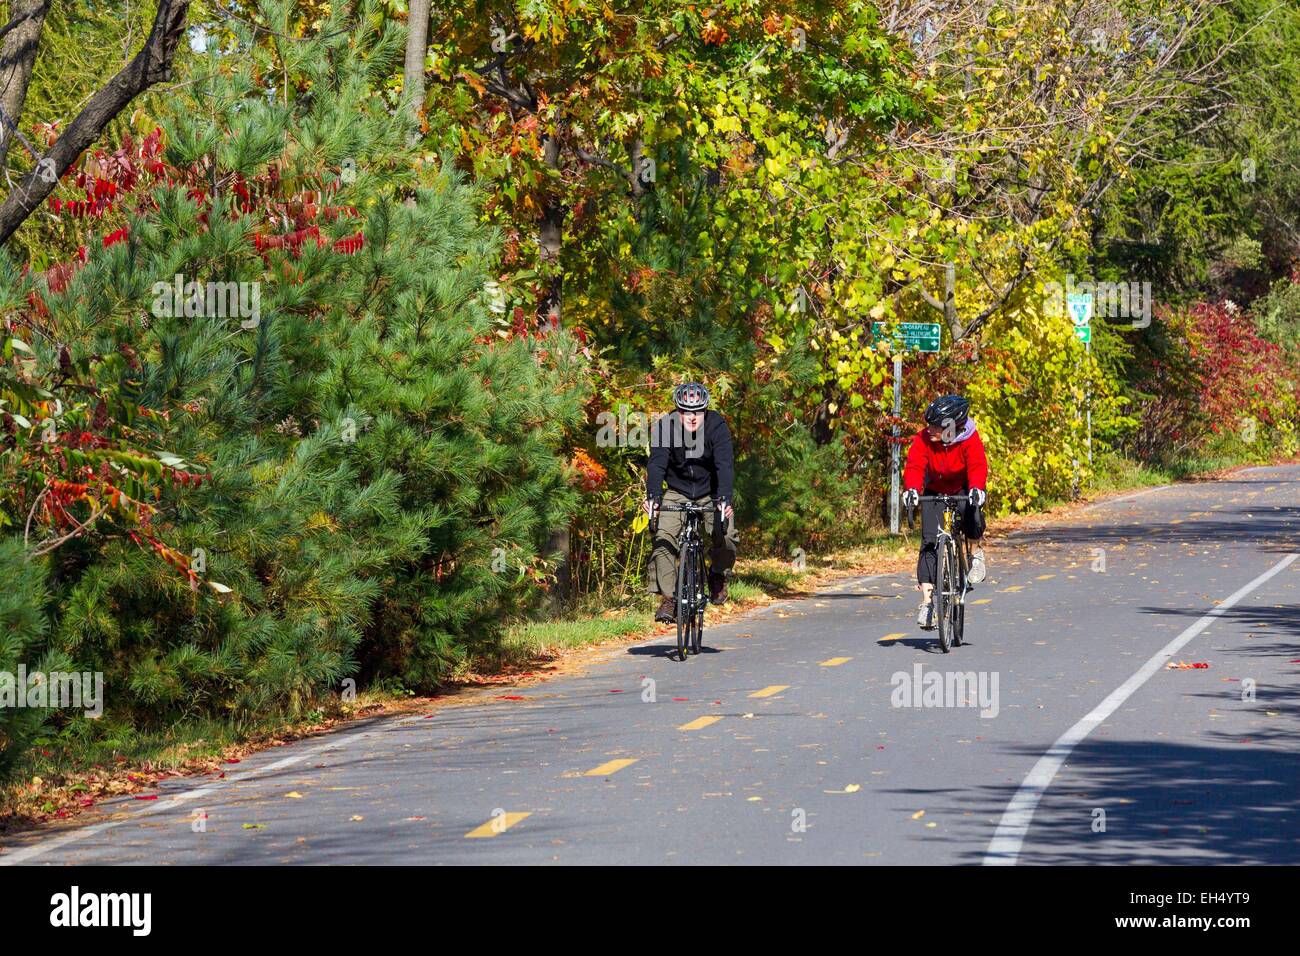 Canada, Quebec, Montreal, Ile Notre-Dame, bike path, cyclists Stock Photo